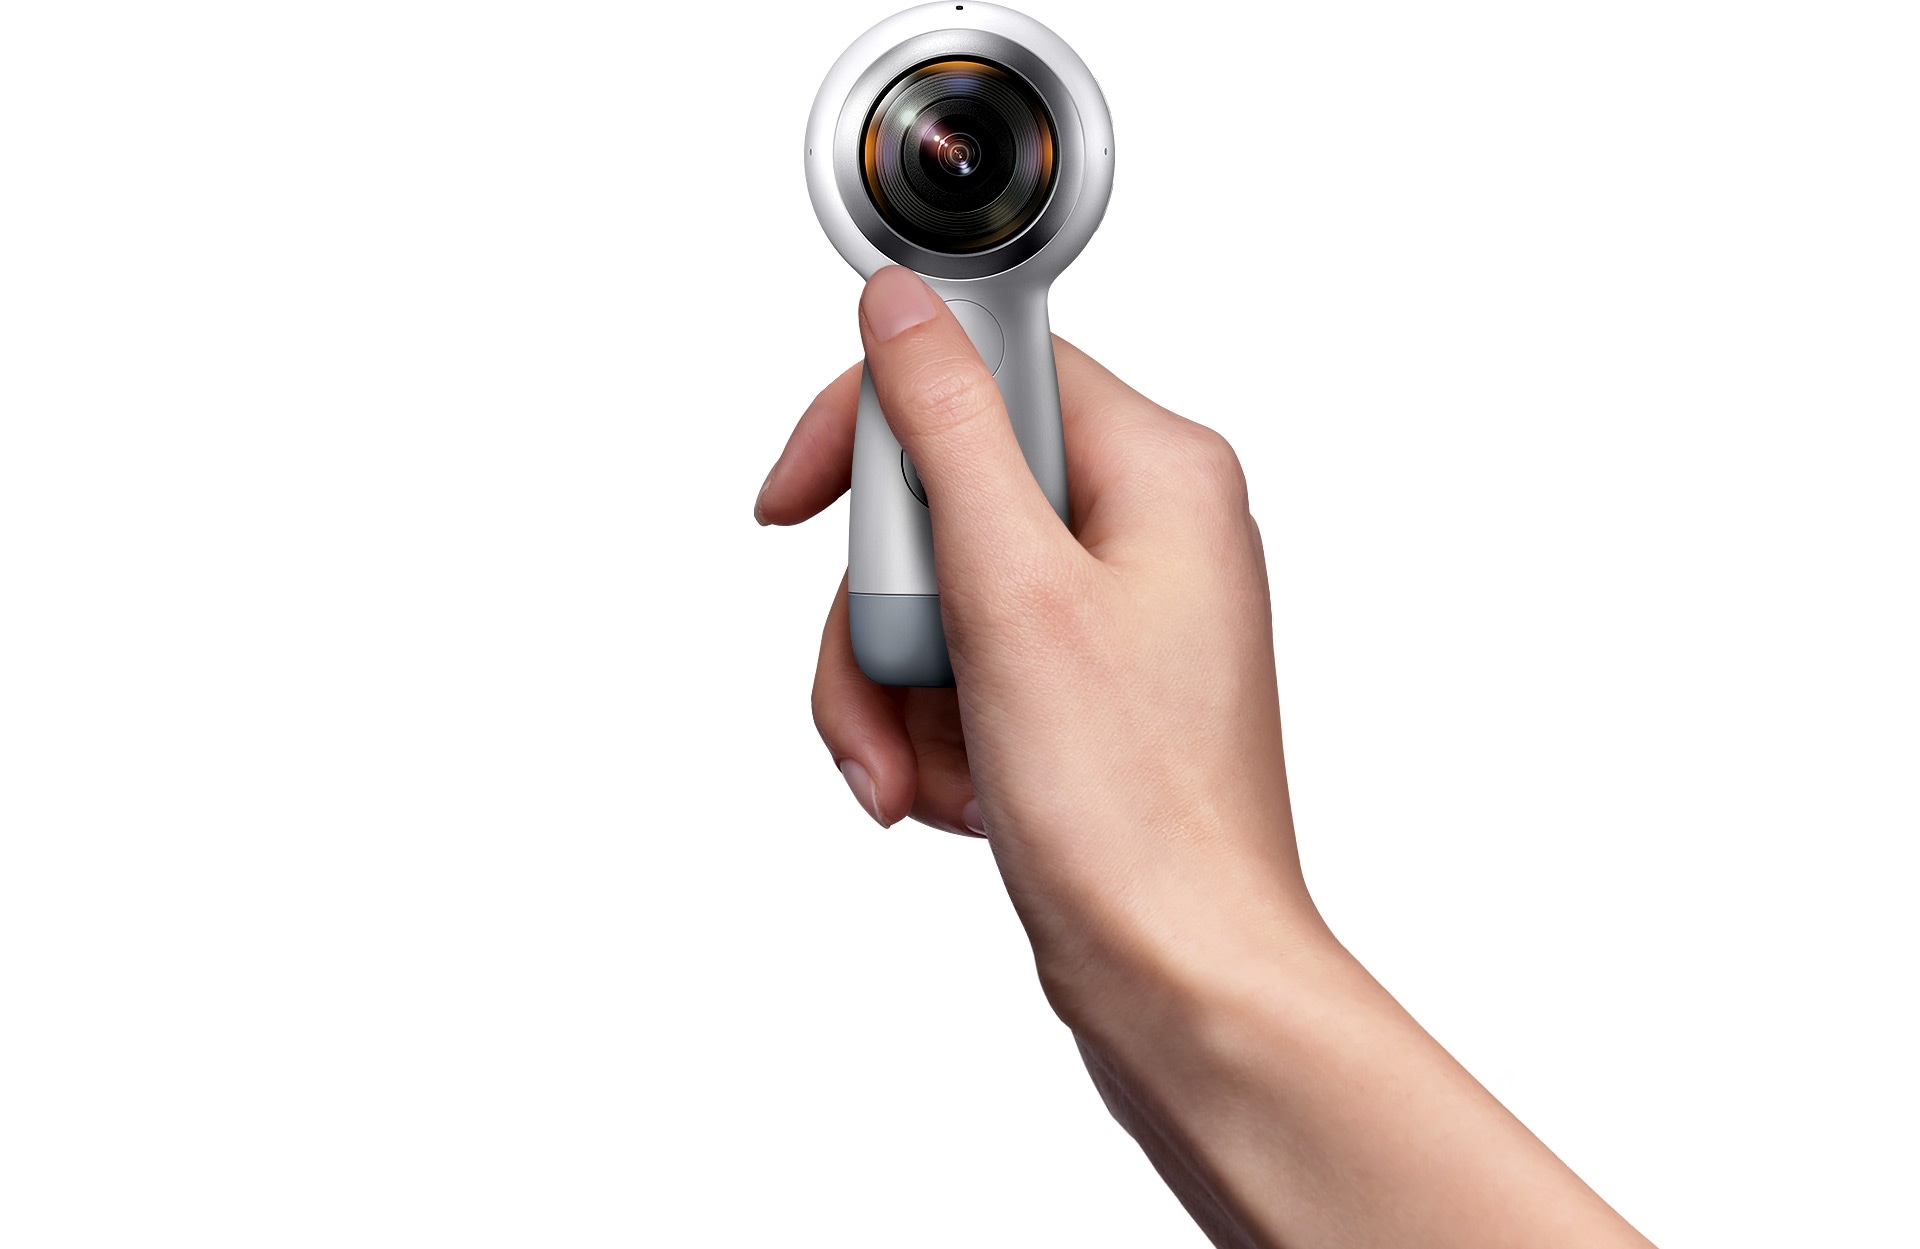 An image of the Gear 360 (2017) being held in a hand.